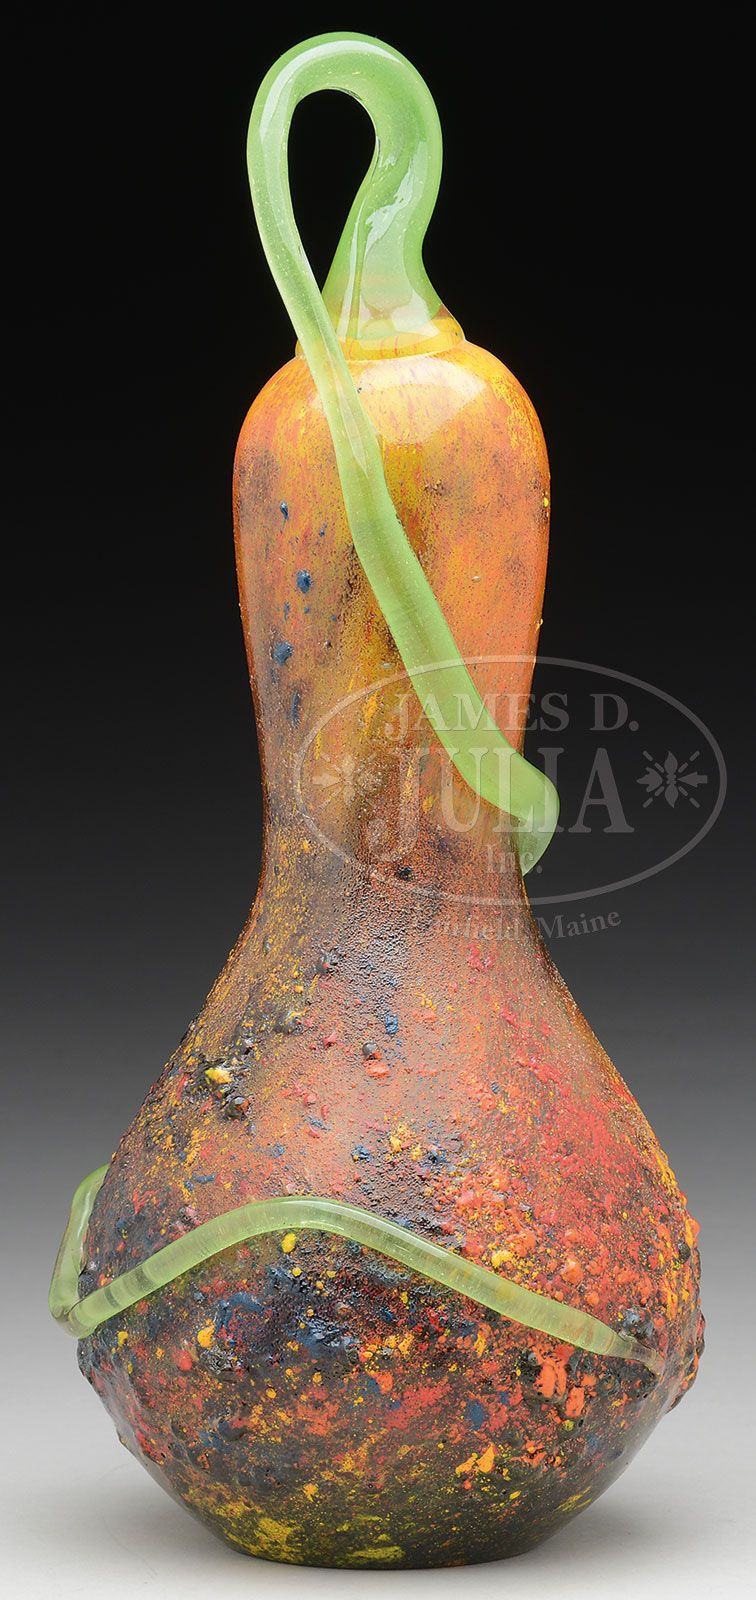 13 attractive orange Glass Vase 2024 free download orange glass vase of daum vitrified gourd vase daum gourd vase has vitrified glass body regarding daum vitrified gourd vase daum gourd vase has vitrified glass body with splashes of red